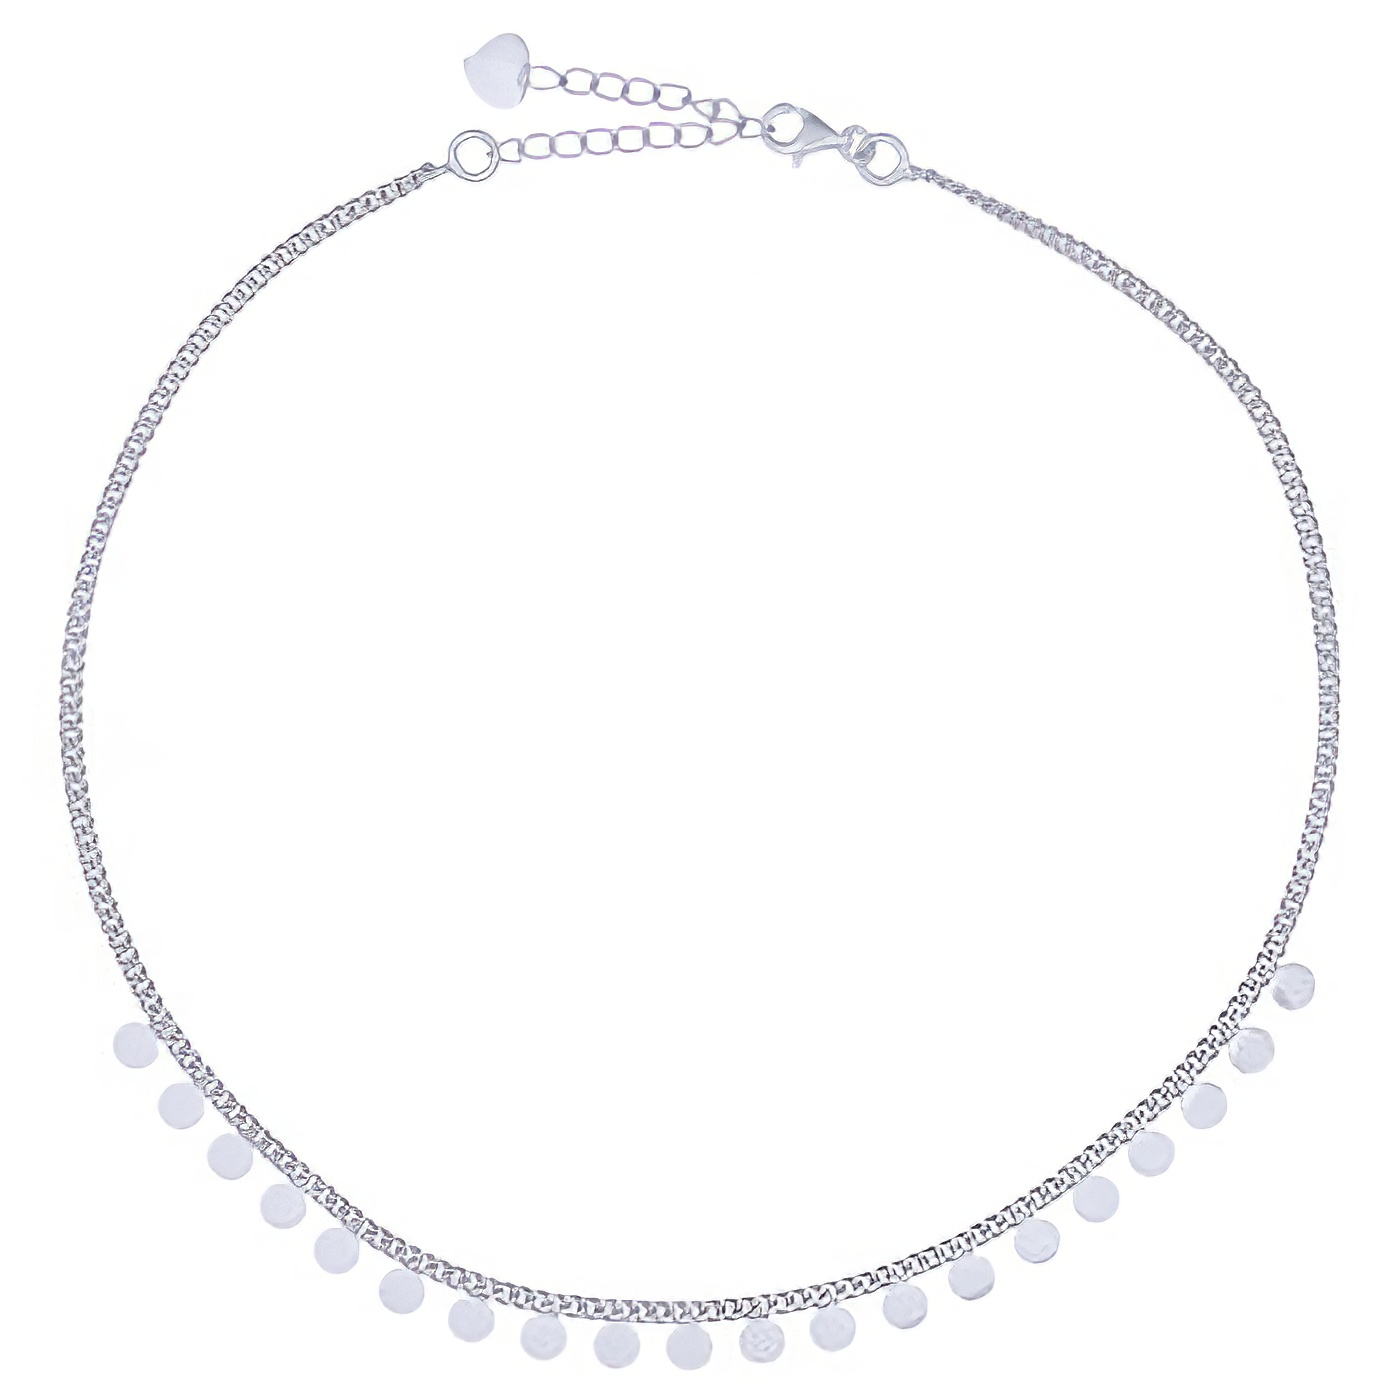 Circle Discs Centered In Rhodium Plated Choker Necklace by BeYindi 